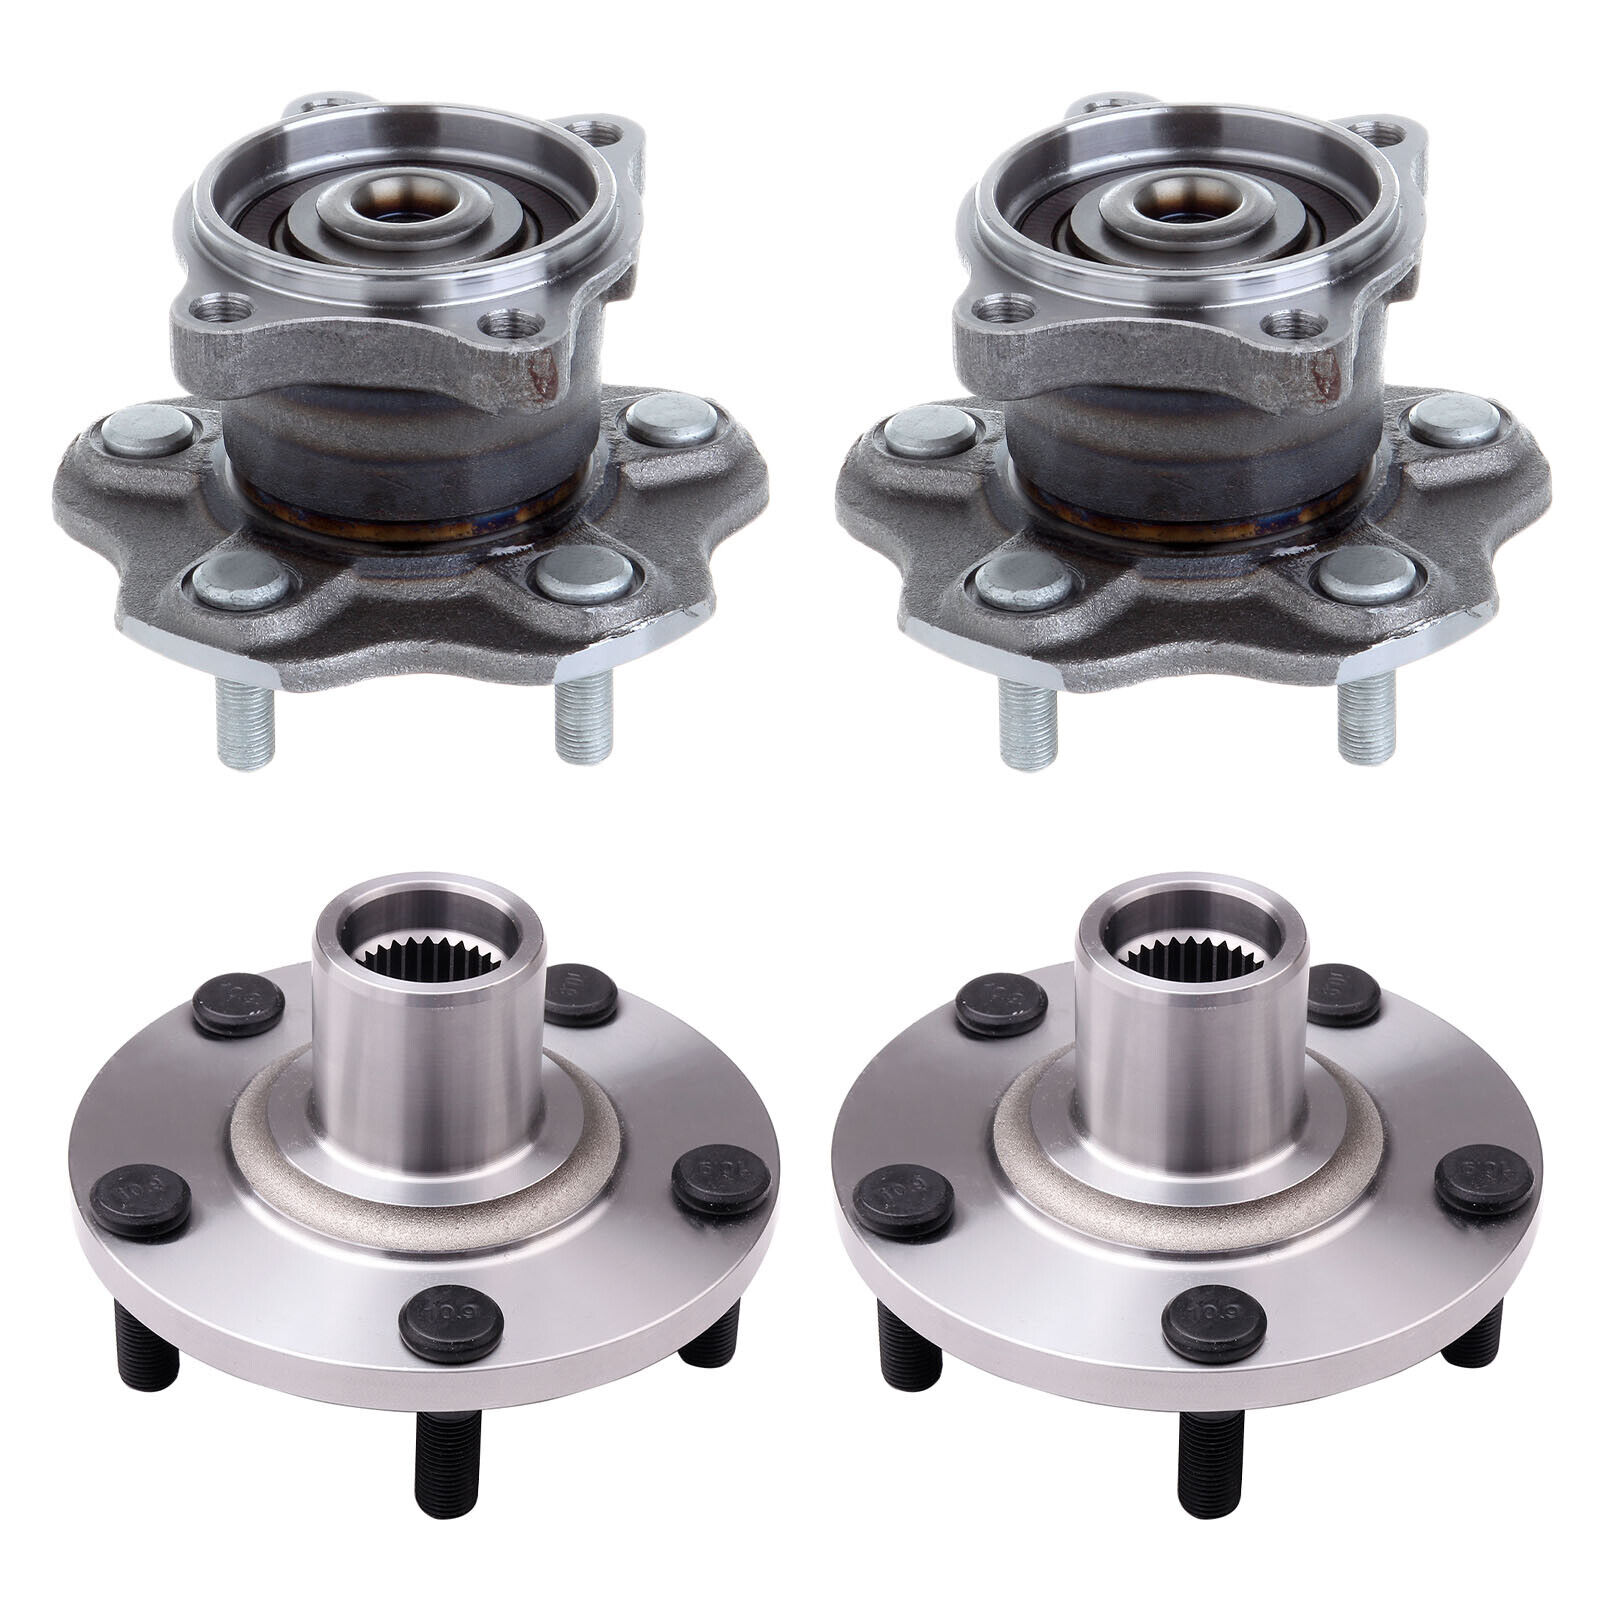 4x Front Rear Wheel Hub Bearing Assembly For 2004-08 Nissan Maxima Altima 3.5L